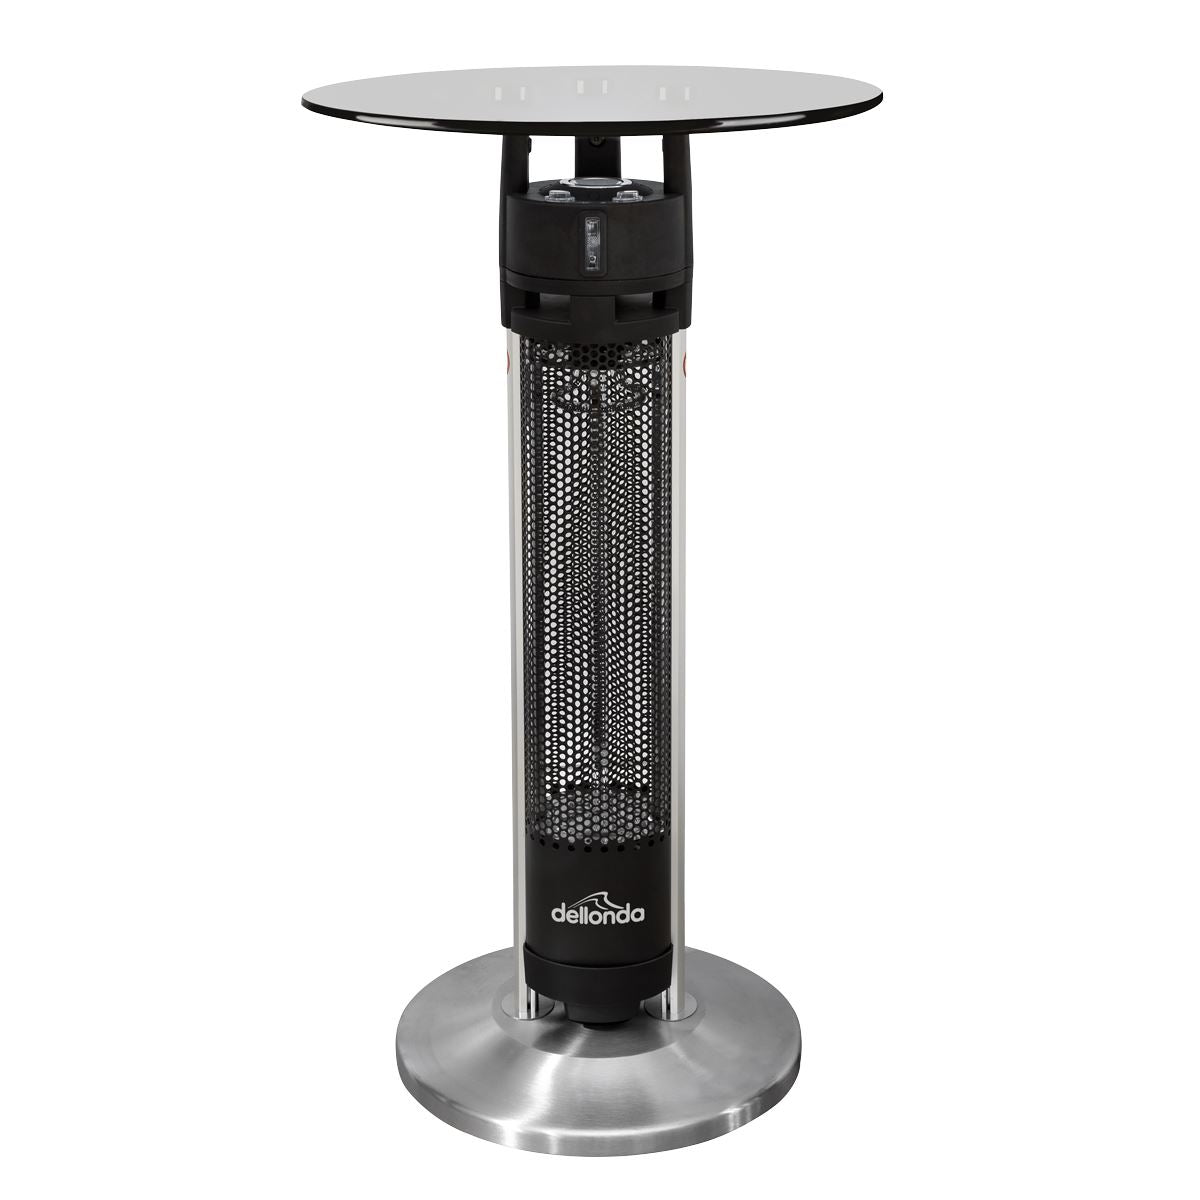 Dellonda Bistro Table with 1600W Heater, 95cm, Black/Stainless Steel